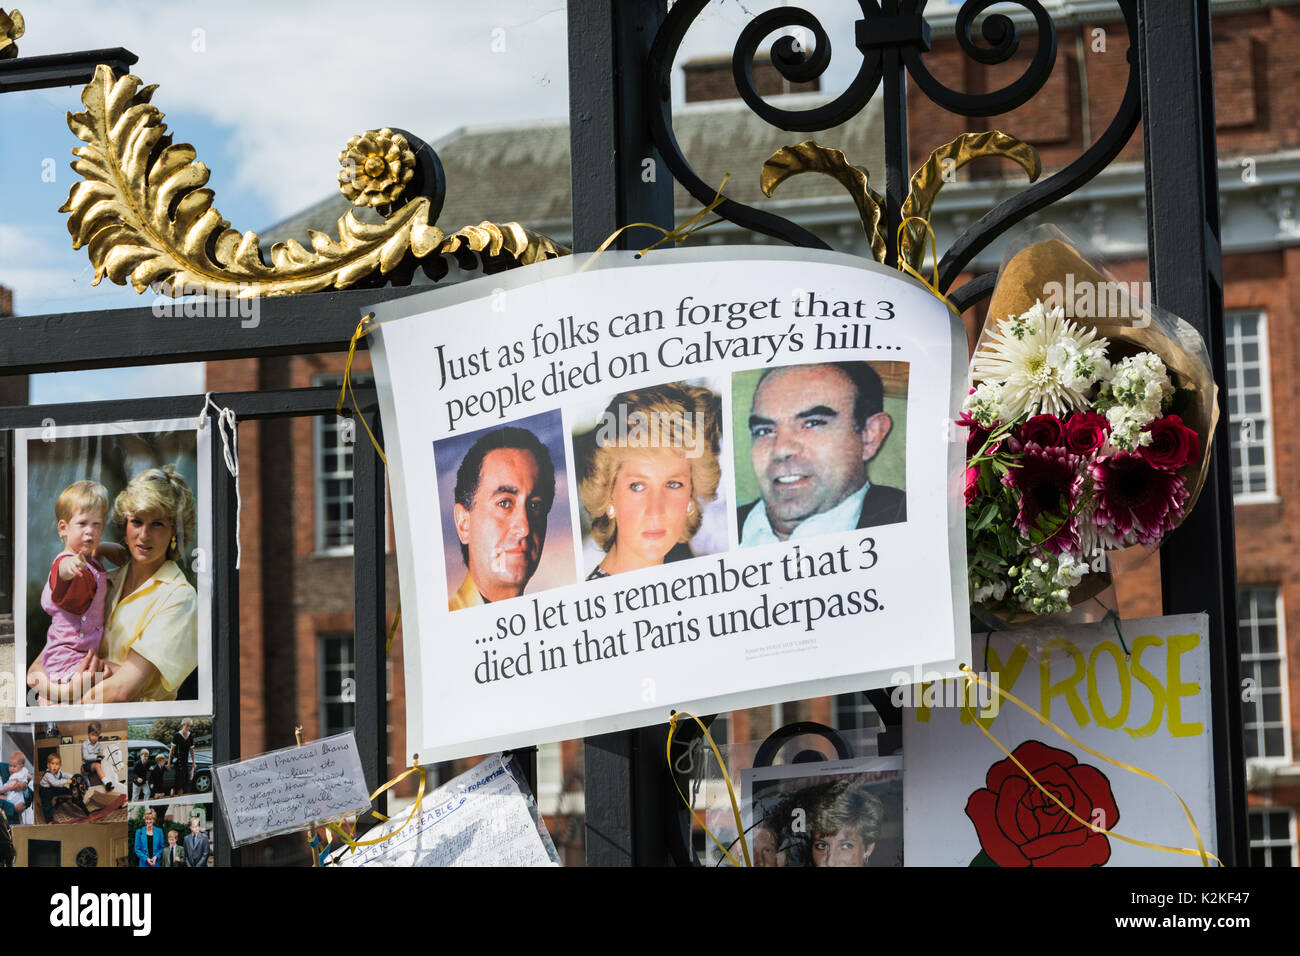 A photo of Princess Diana, Dodi Al-Fayed and Henri Paul outside Kensington Palace, on the twentieth anniversary of their deaths in the fatal car crash in Paris. Stock Photo